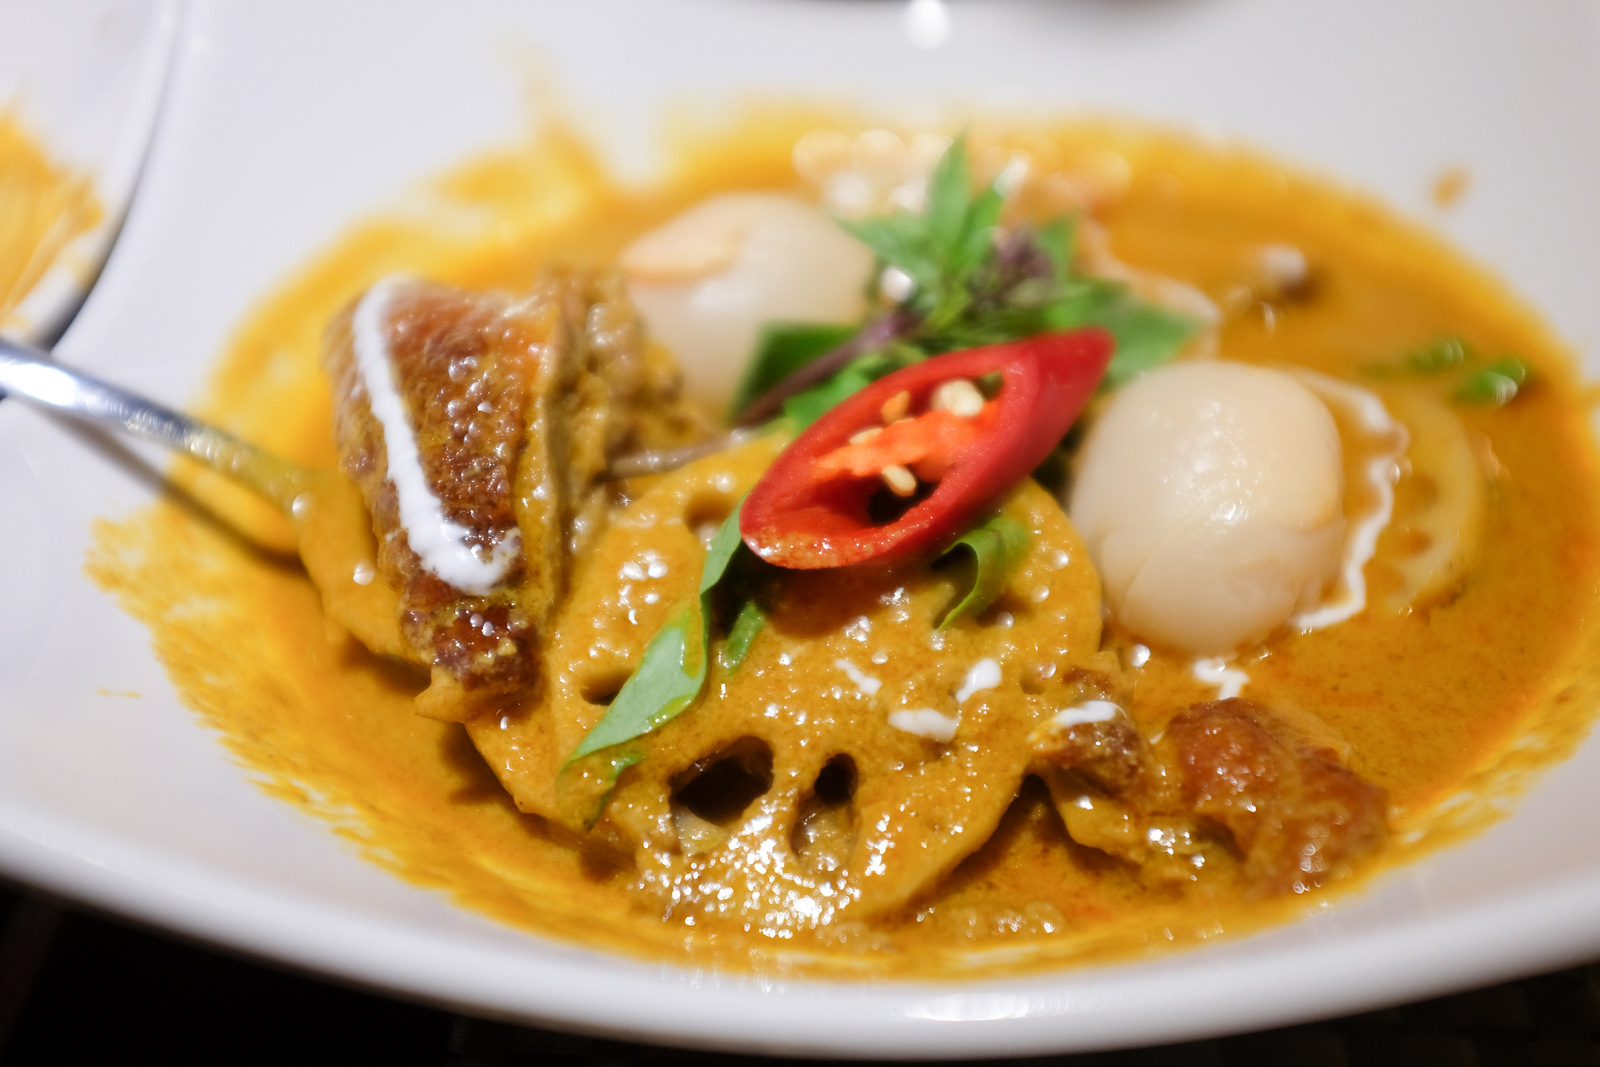 6. Chang Thai - red curry with roast duck